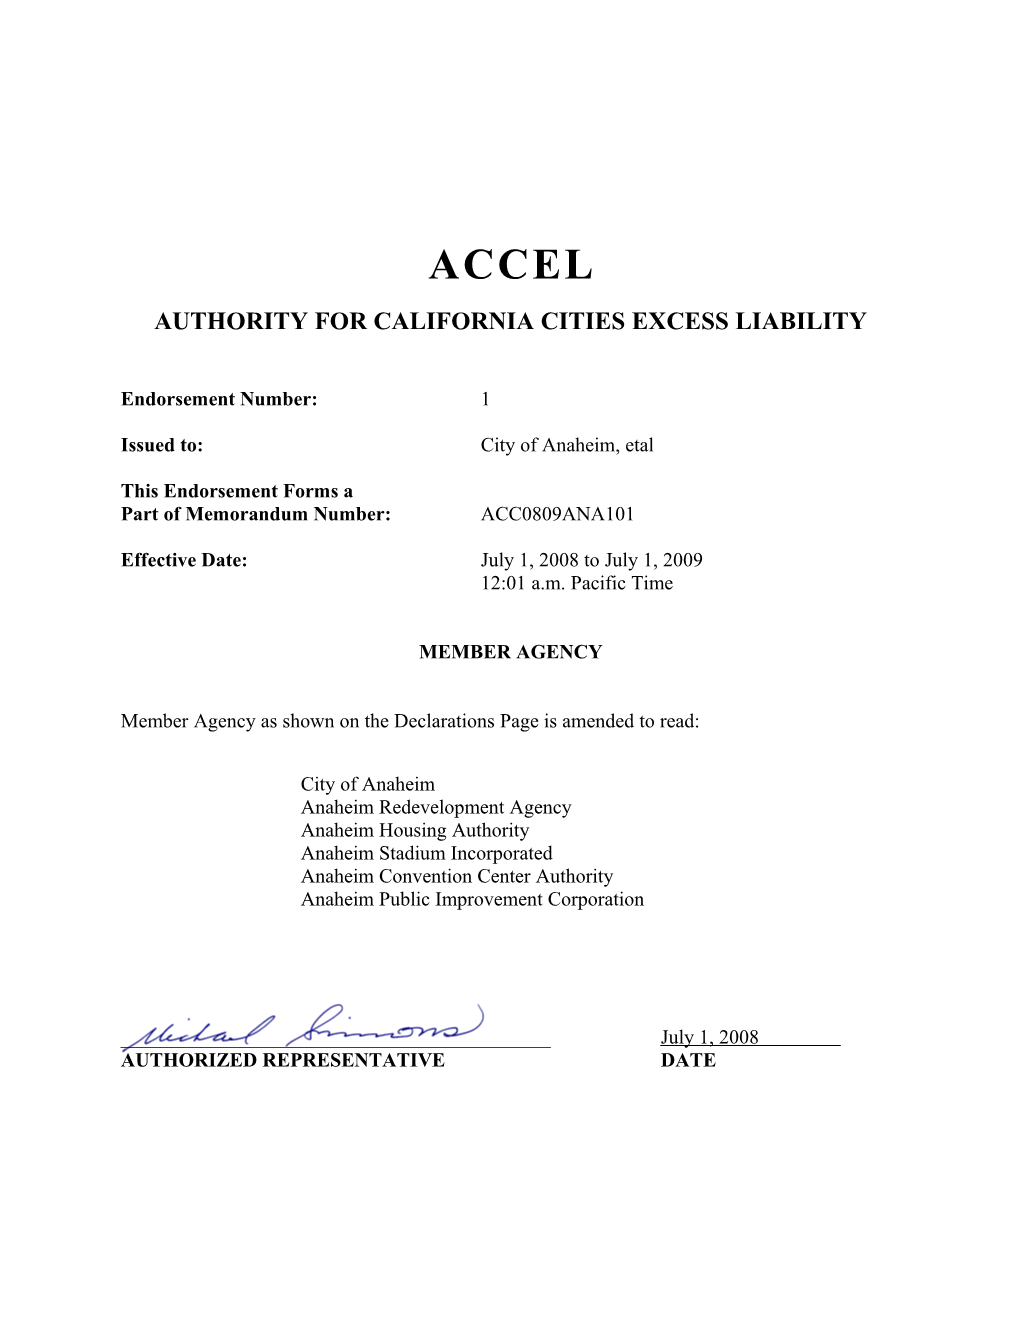 Authority for California Cities Excess Liability